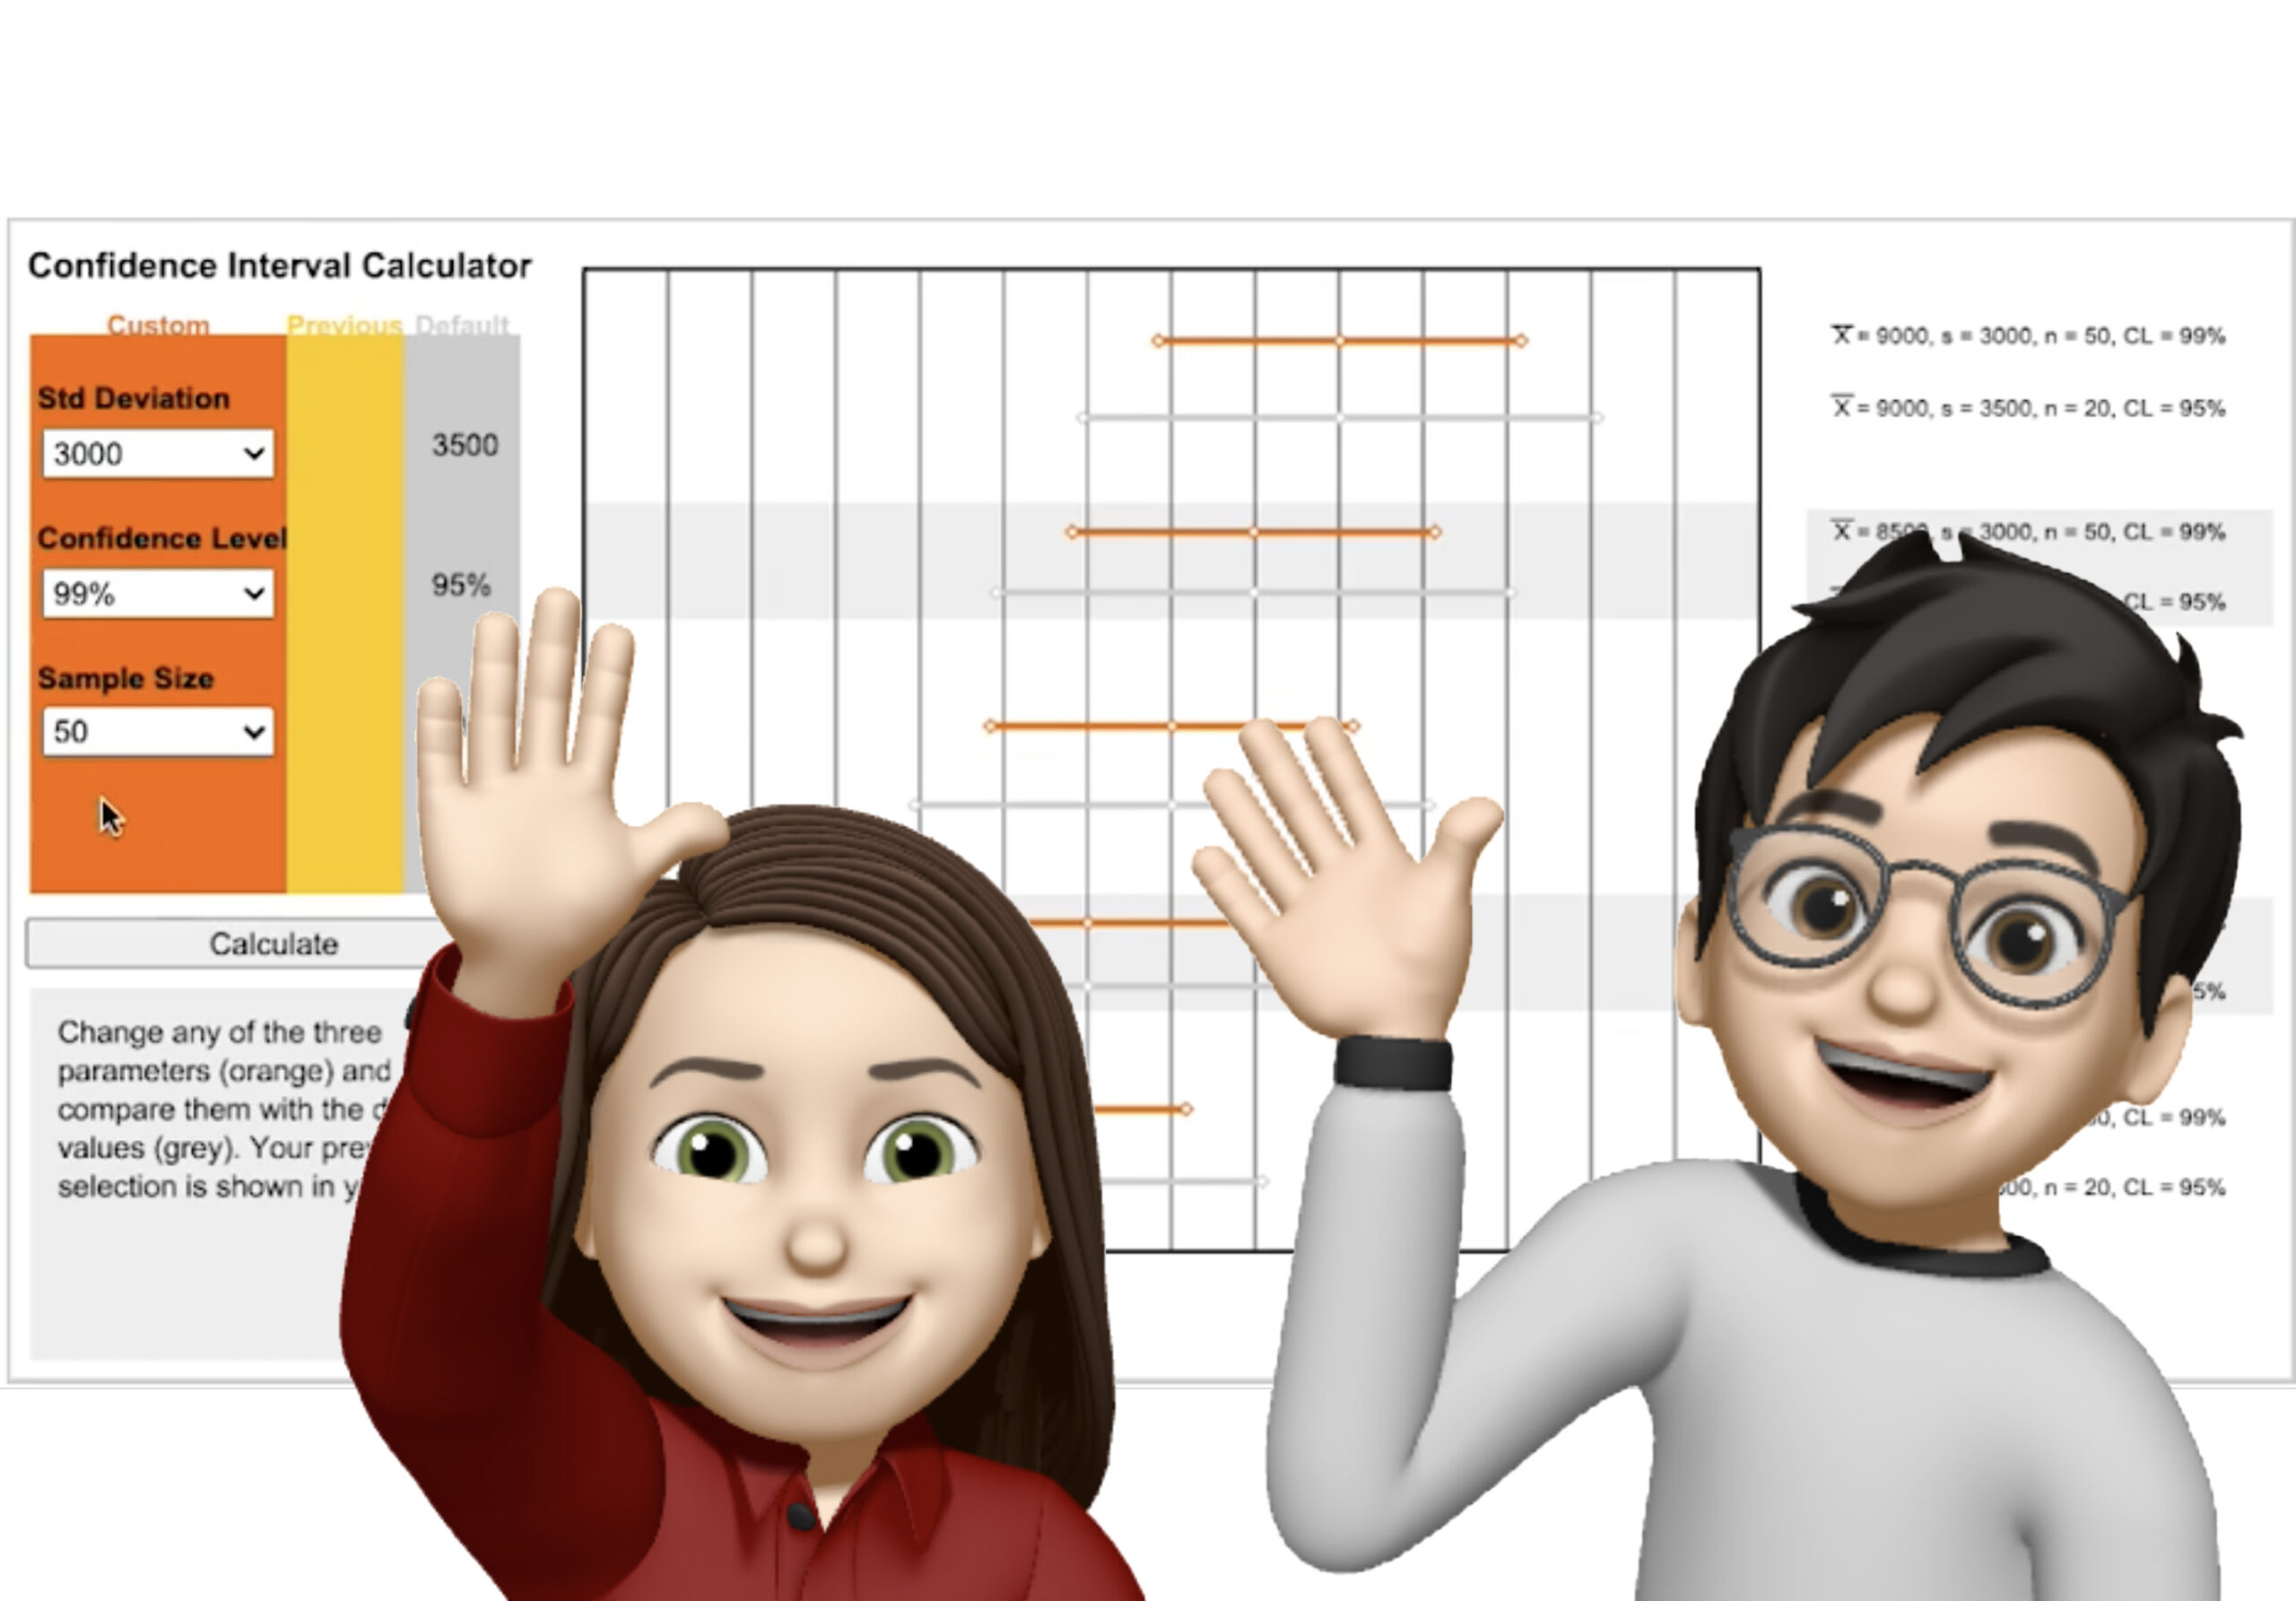 Jackie and Charlie's Memoji avatars waving in front of a screen grab of the CI calculator.